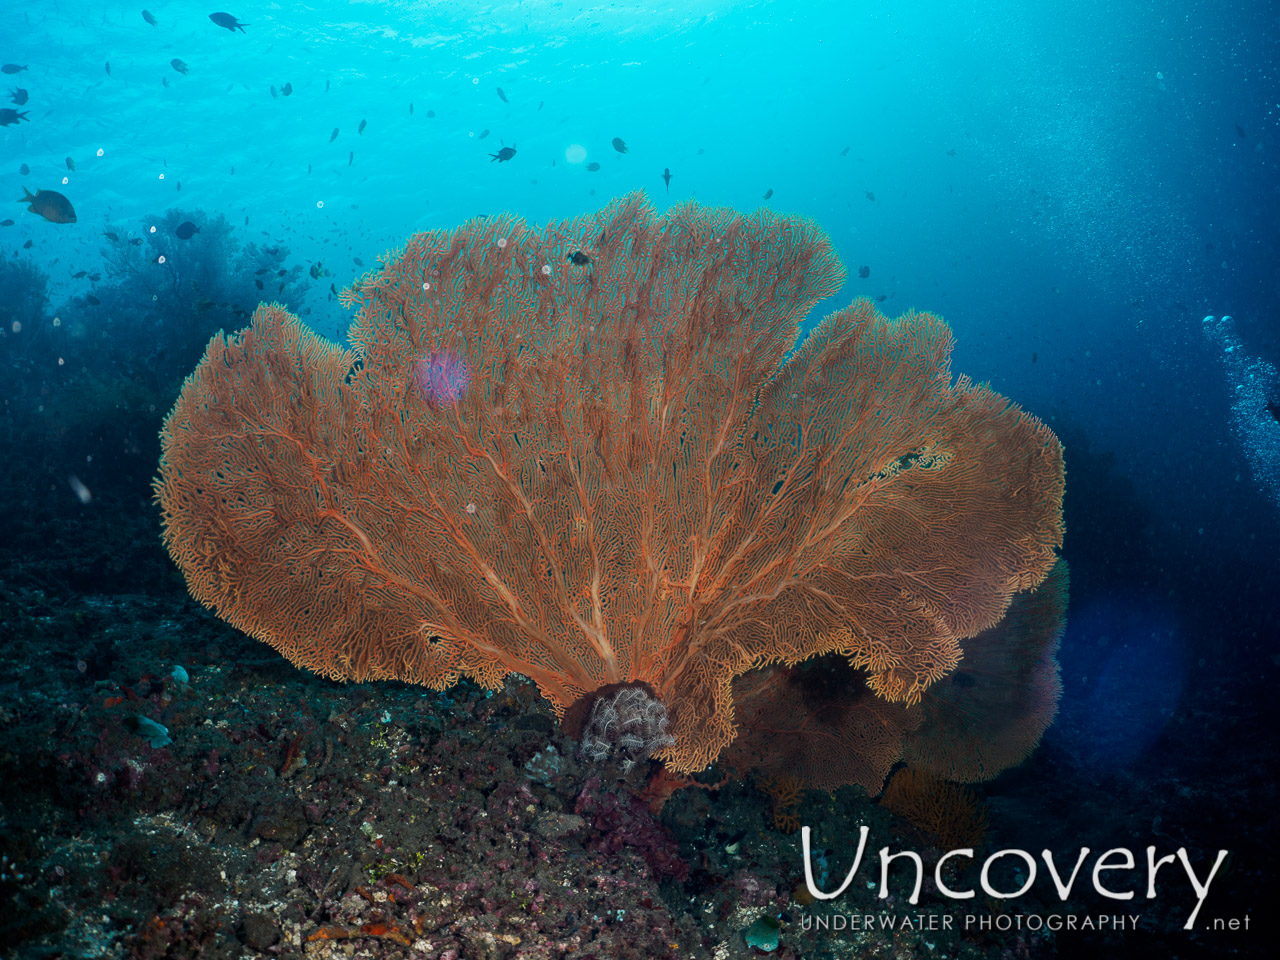 Coral, photo taken in Indonesia, Bali, Amed, Lipah Bay